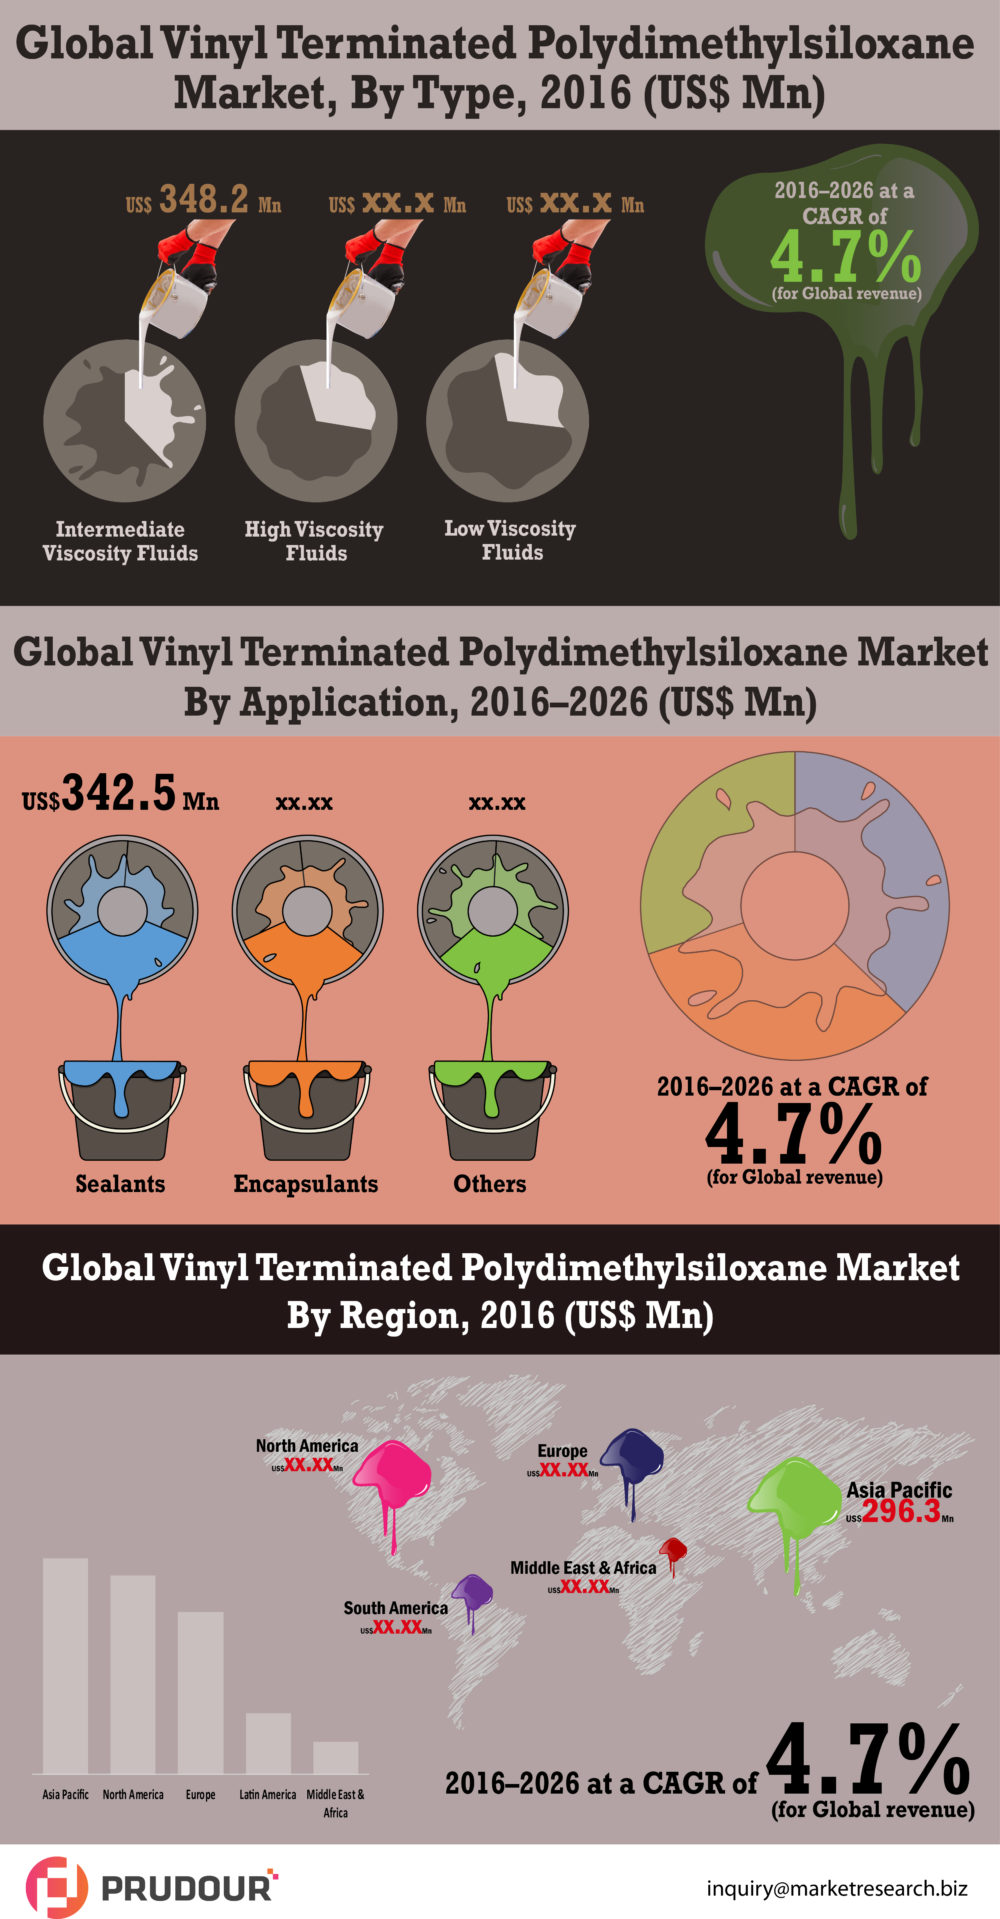 CAGR Of 4.7%: Global Vinyl Terminated Polydimethylsiloxane Market about to hit CAGR of 4.7% from 2017 to 2026